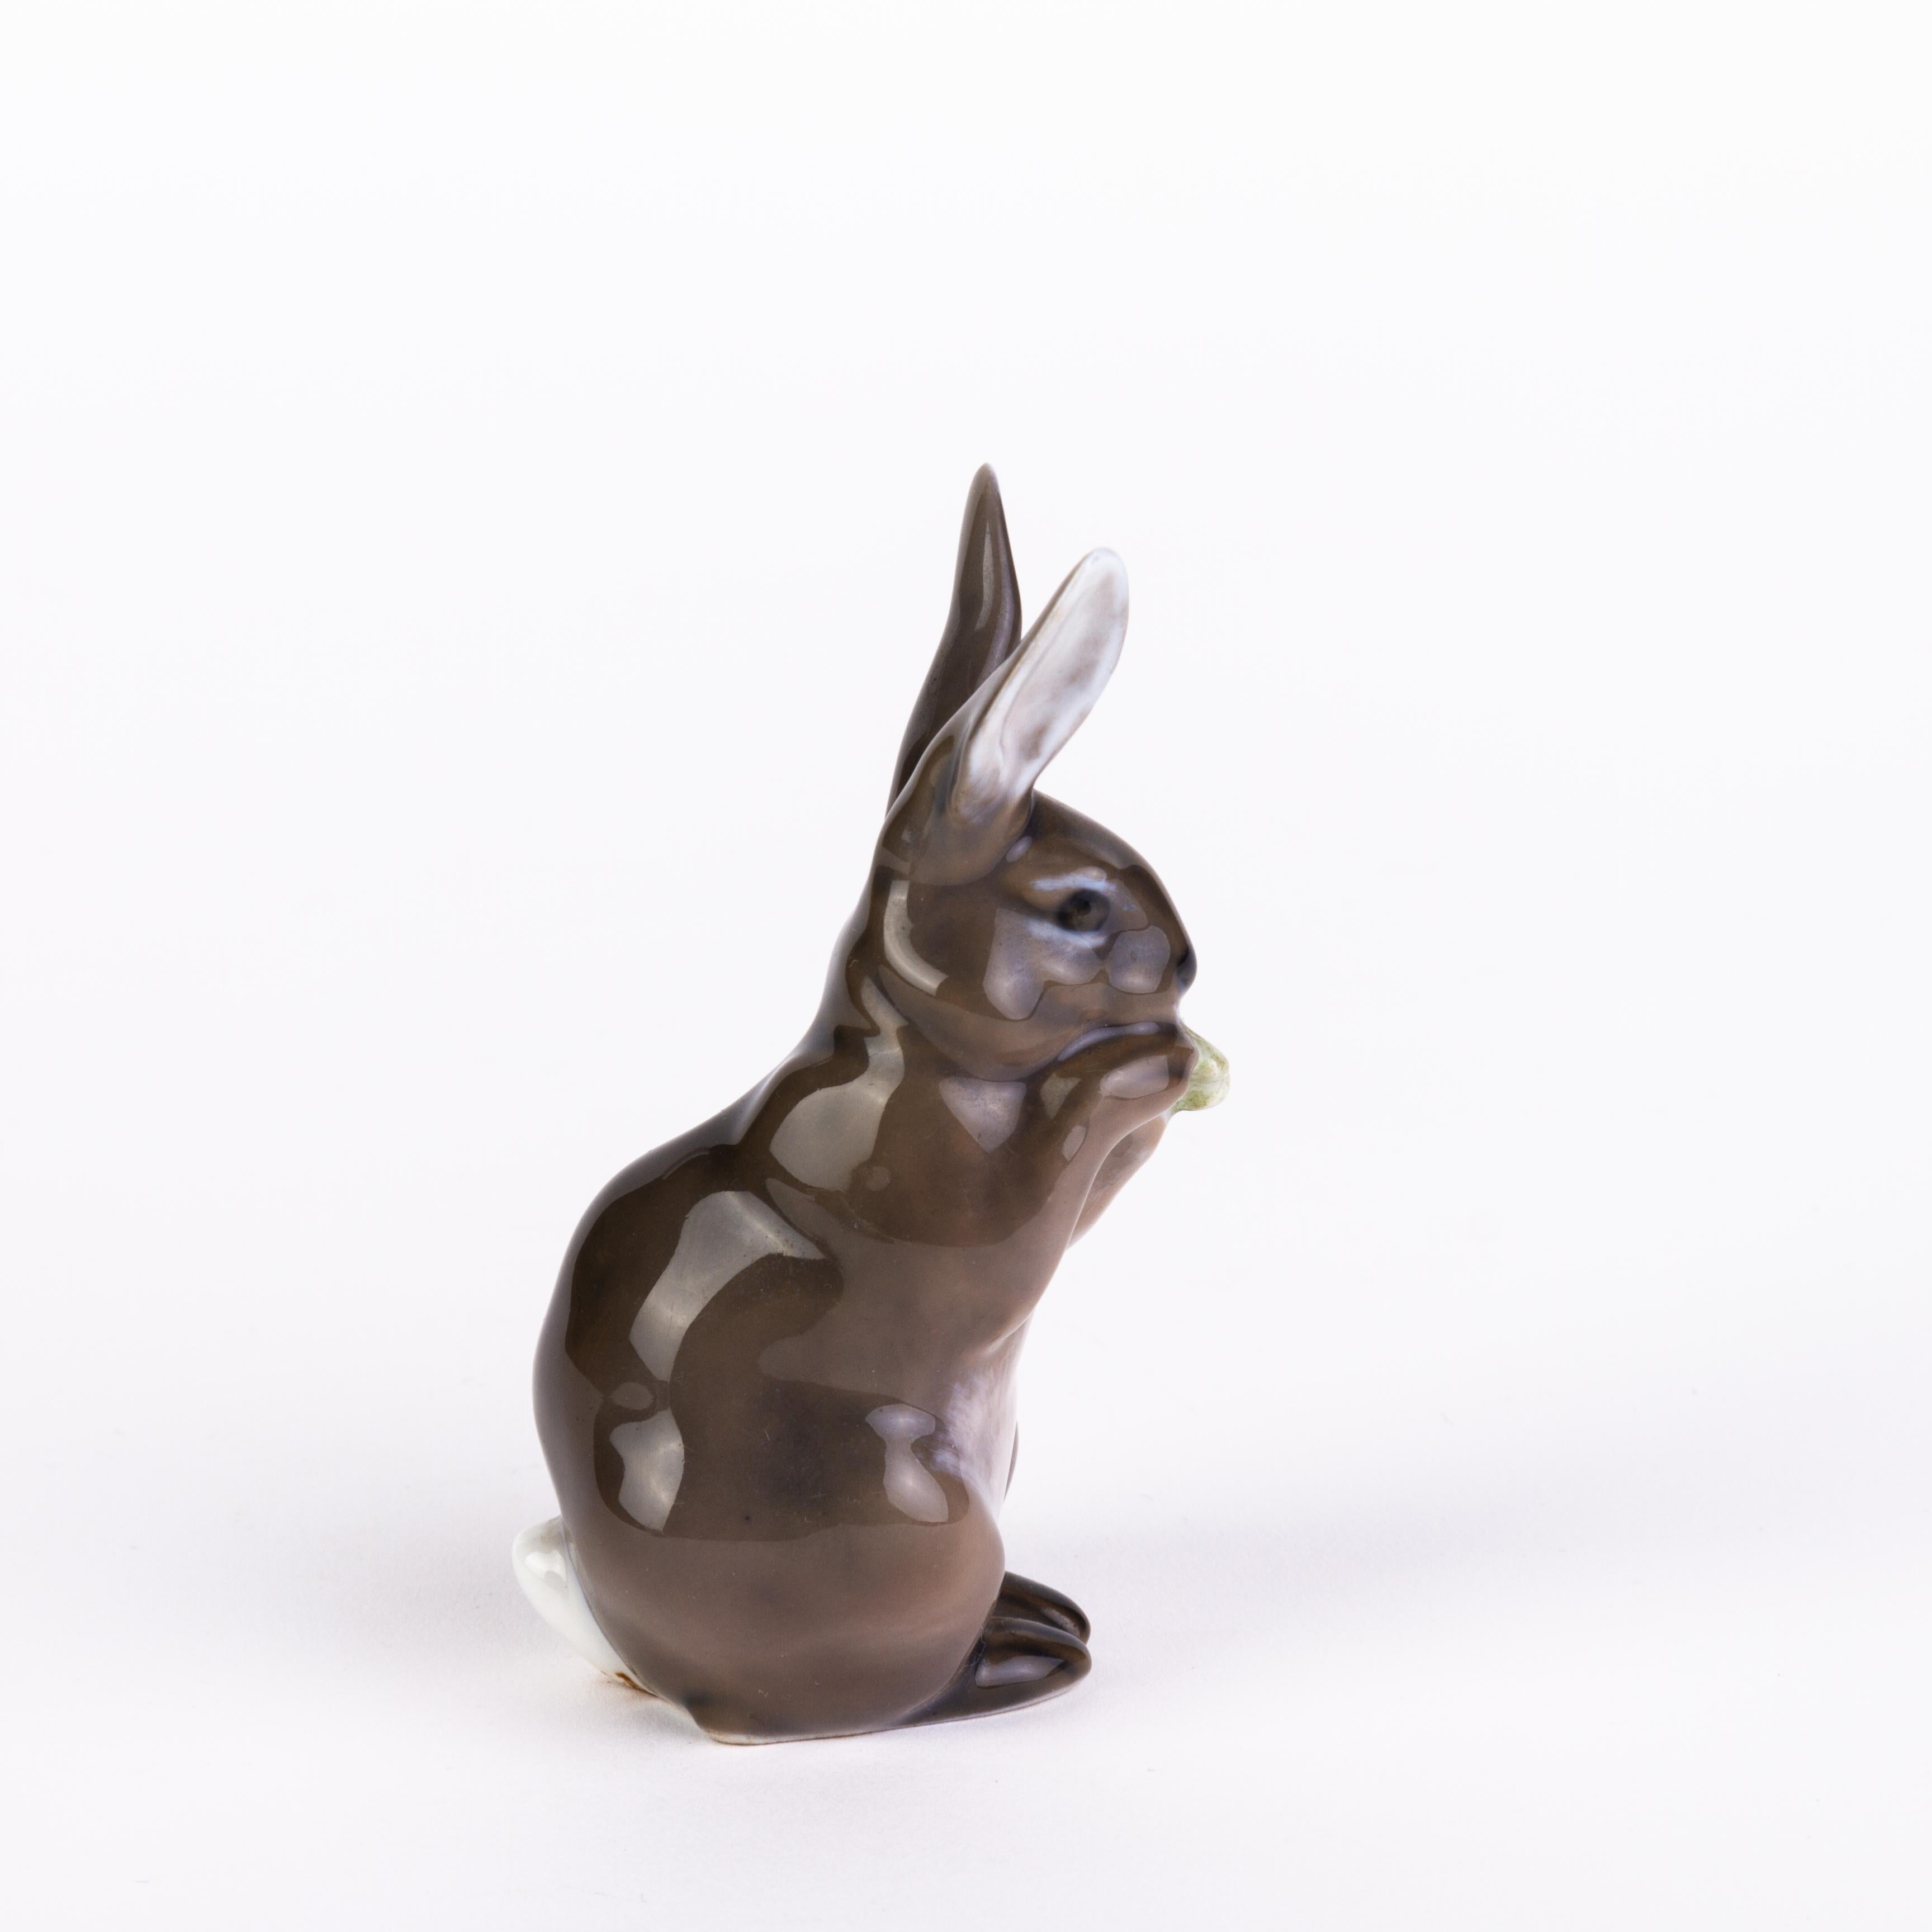 Royal Copenhagen Fine Denmark Porcelain Figure Rabbit 1019
Good condition
From a private collection.
Free international shipping.